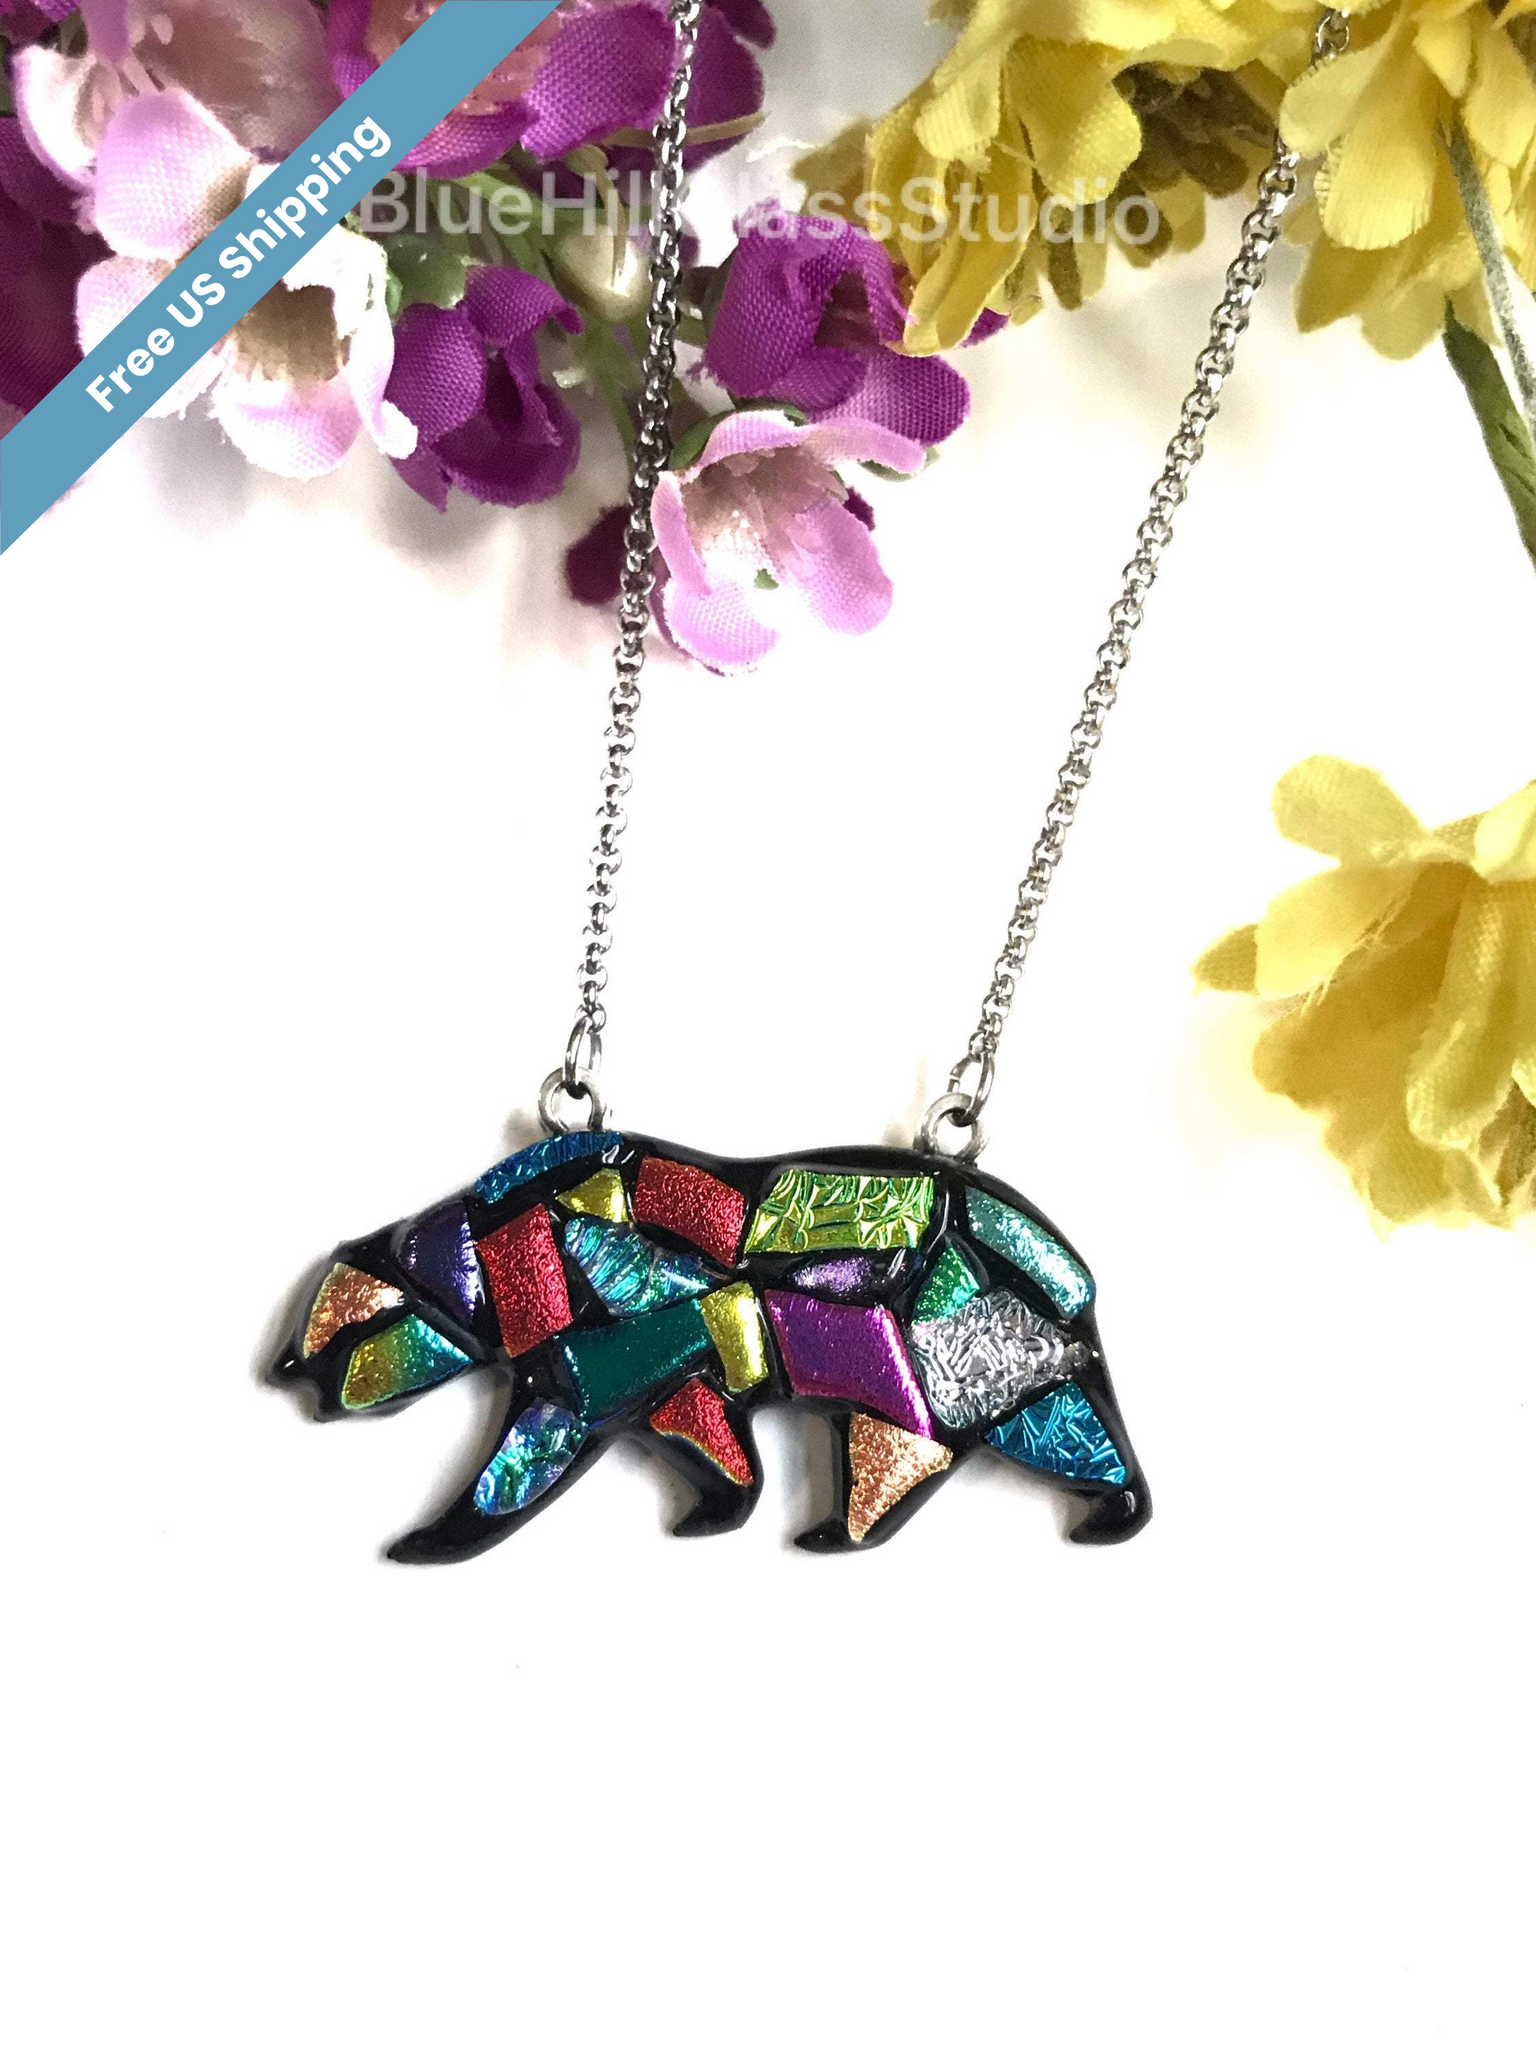 Bear Dichroic Fused Glass Pendant with Stainless Steel Necklace